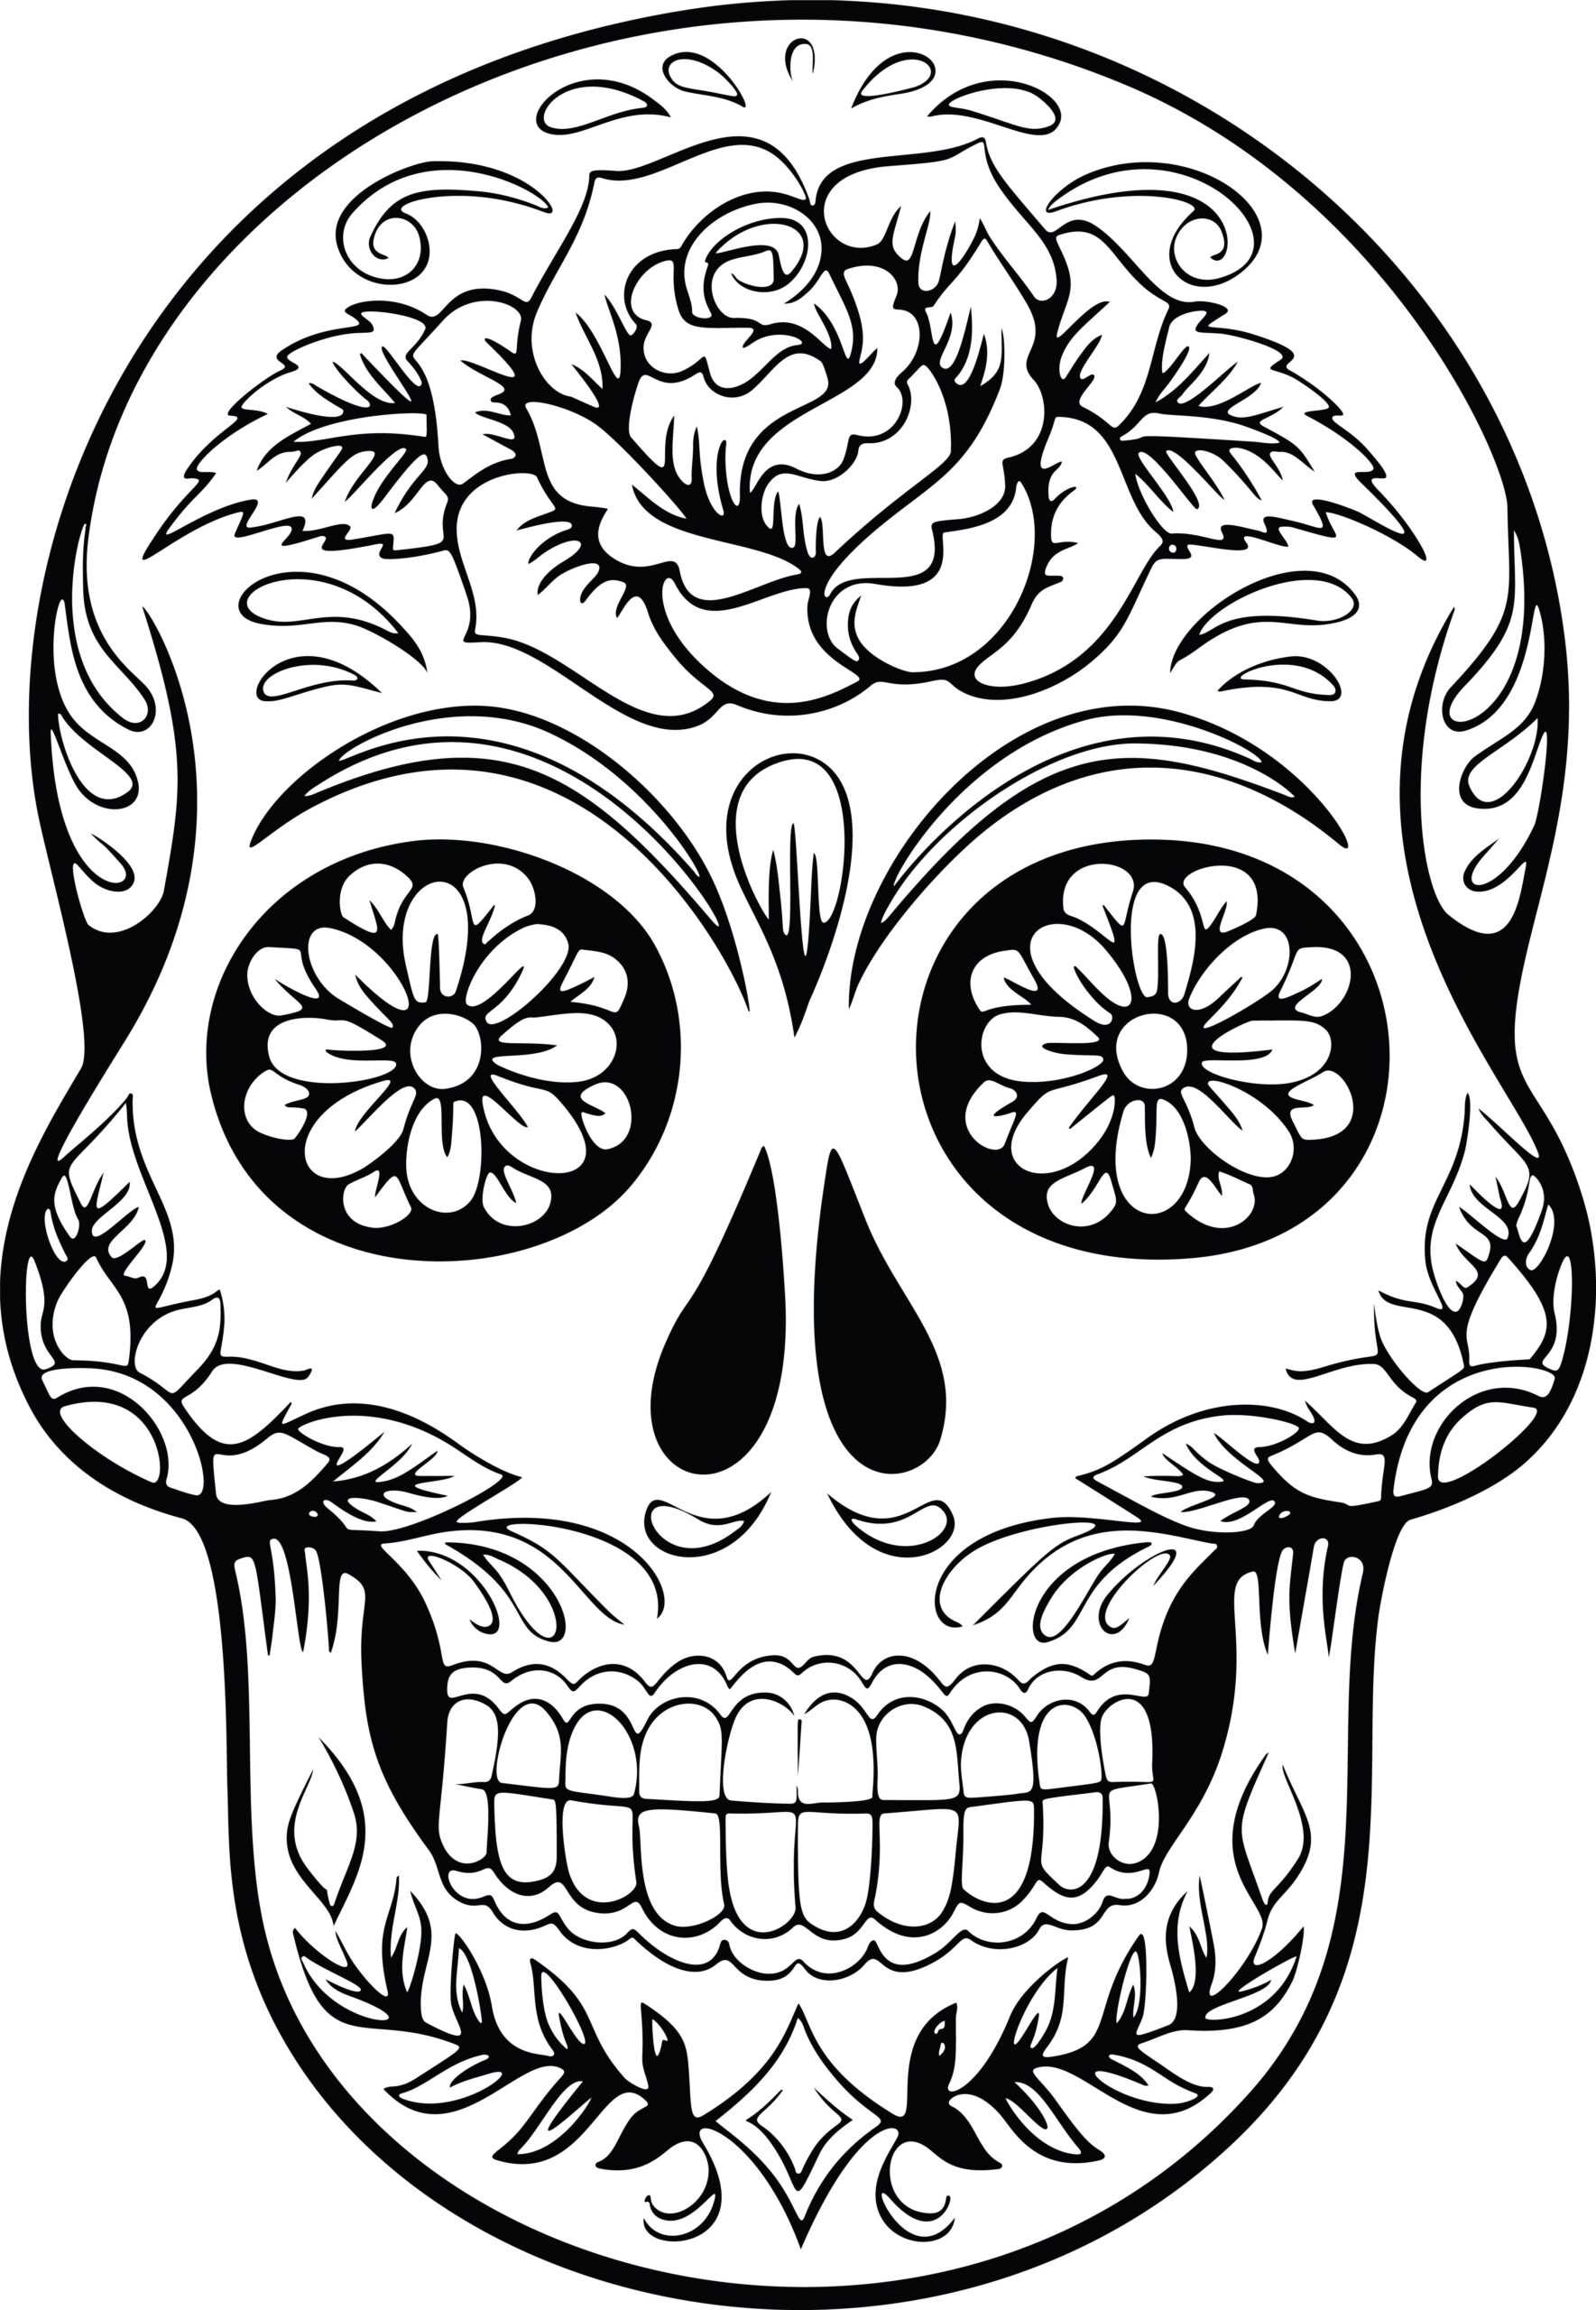 Best Coloring : Free Skull Anatomy Pages Muscular System Regarding Blank Sugar Skull Template